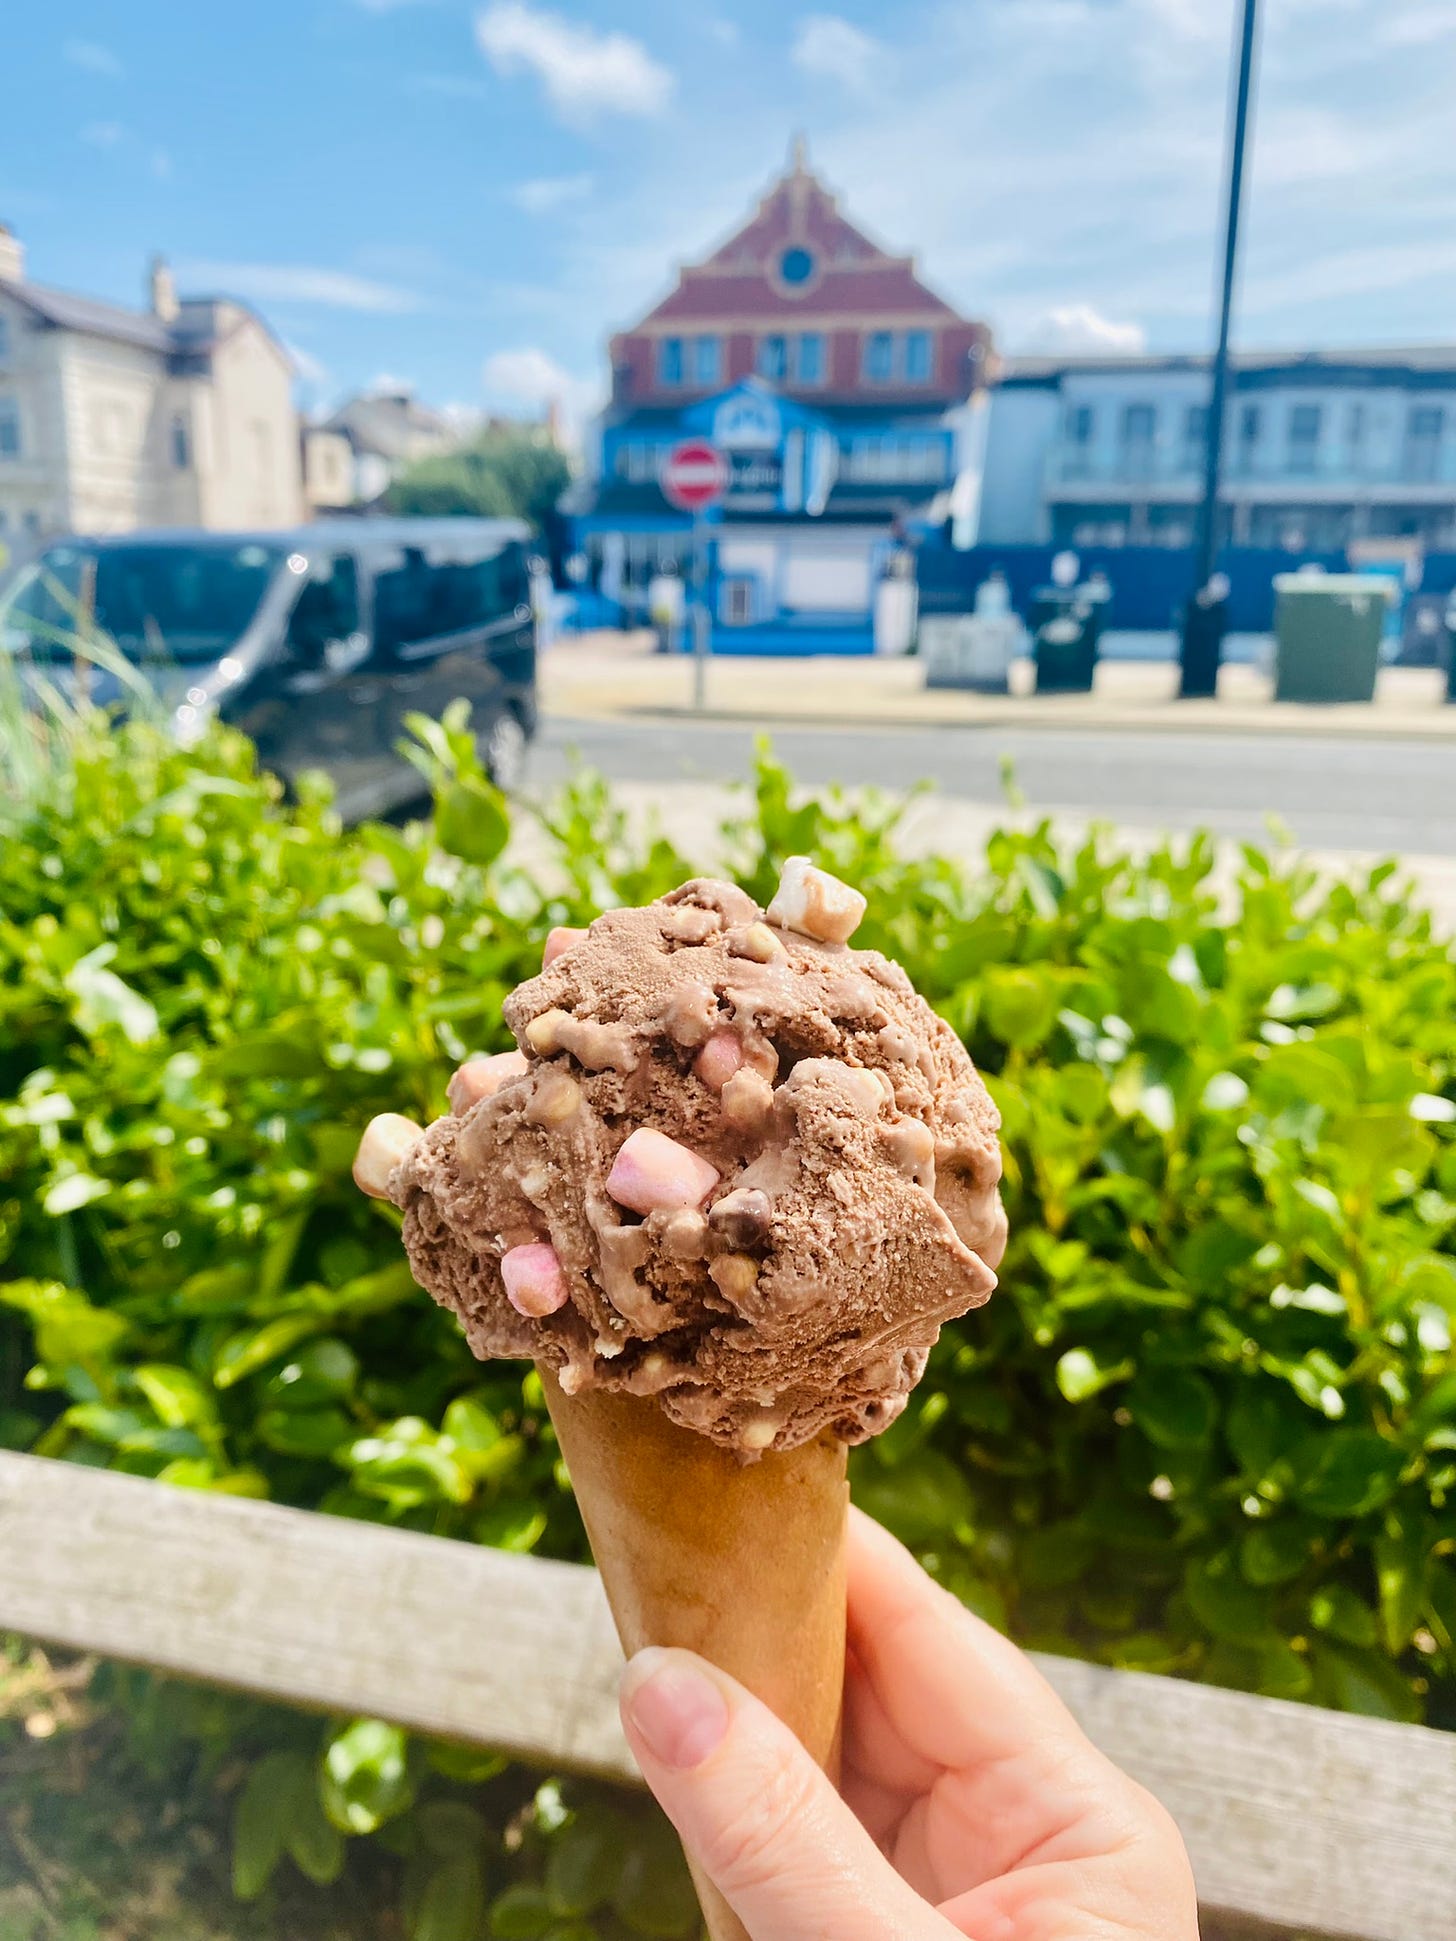 My hand holding a rocky road ice cream in a cone, outside in the sun with a green leafy hedge and a seaside street in the background.